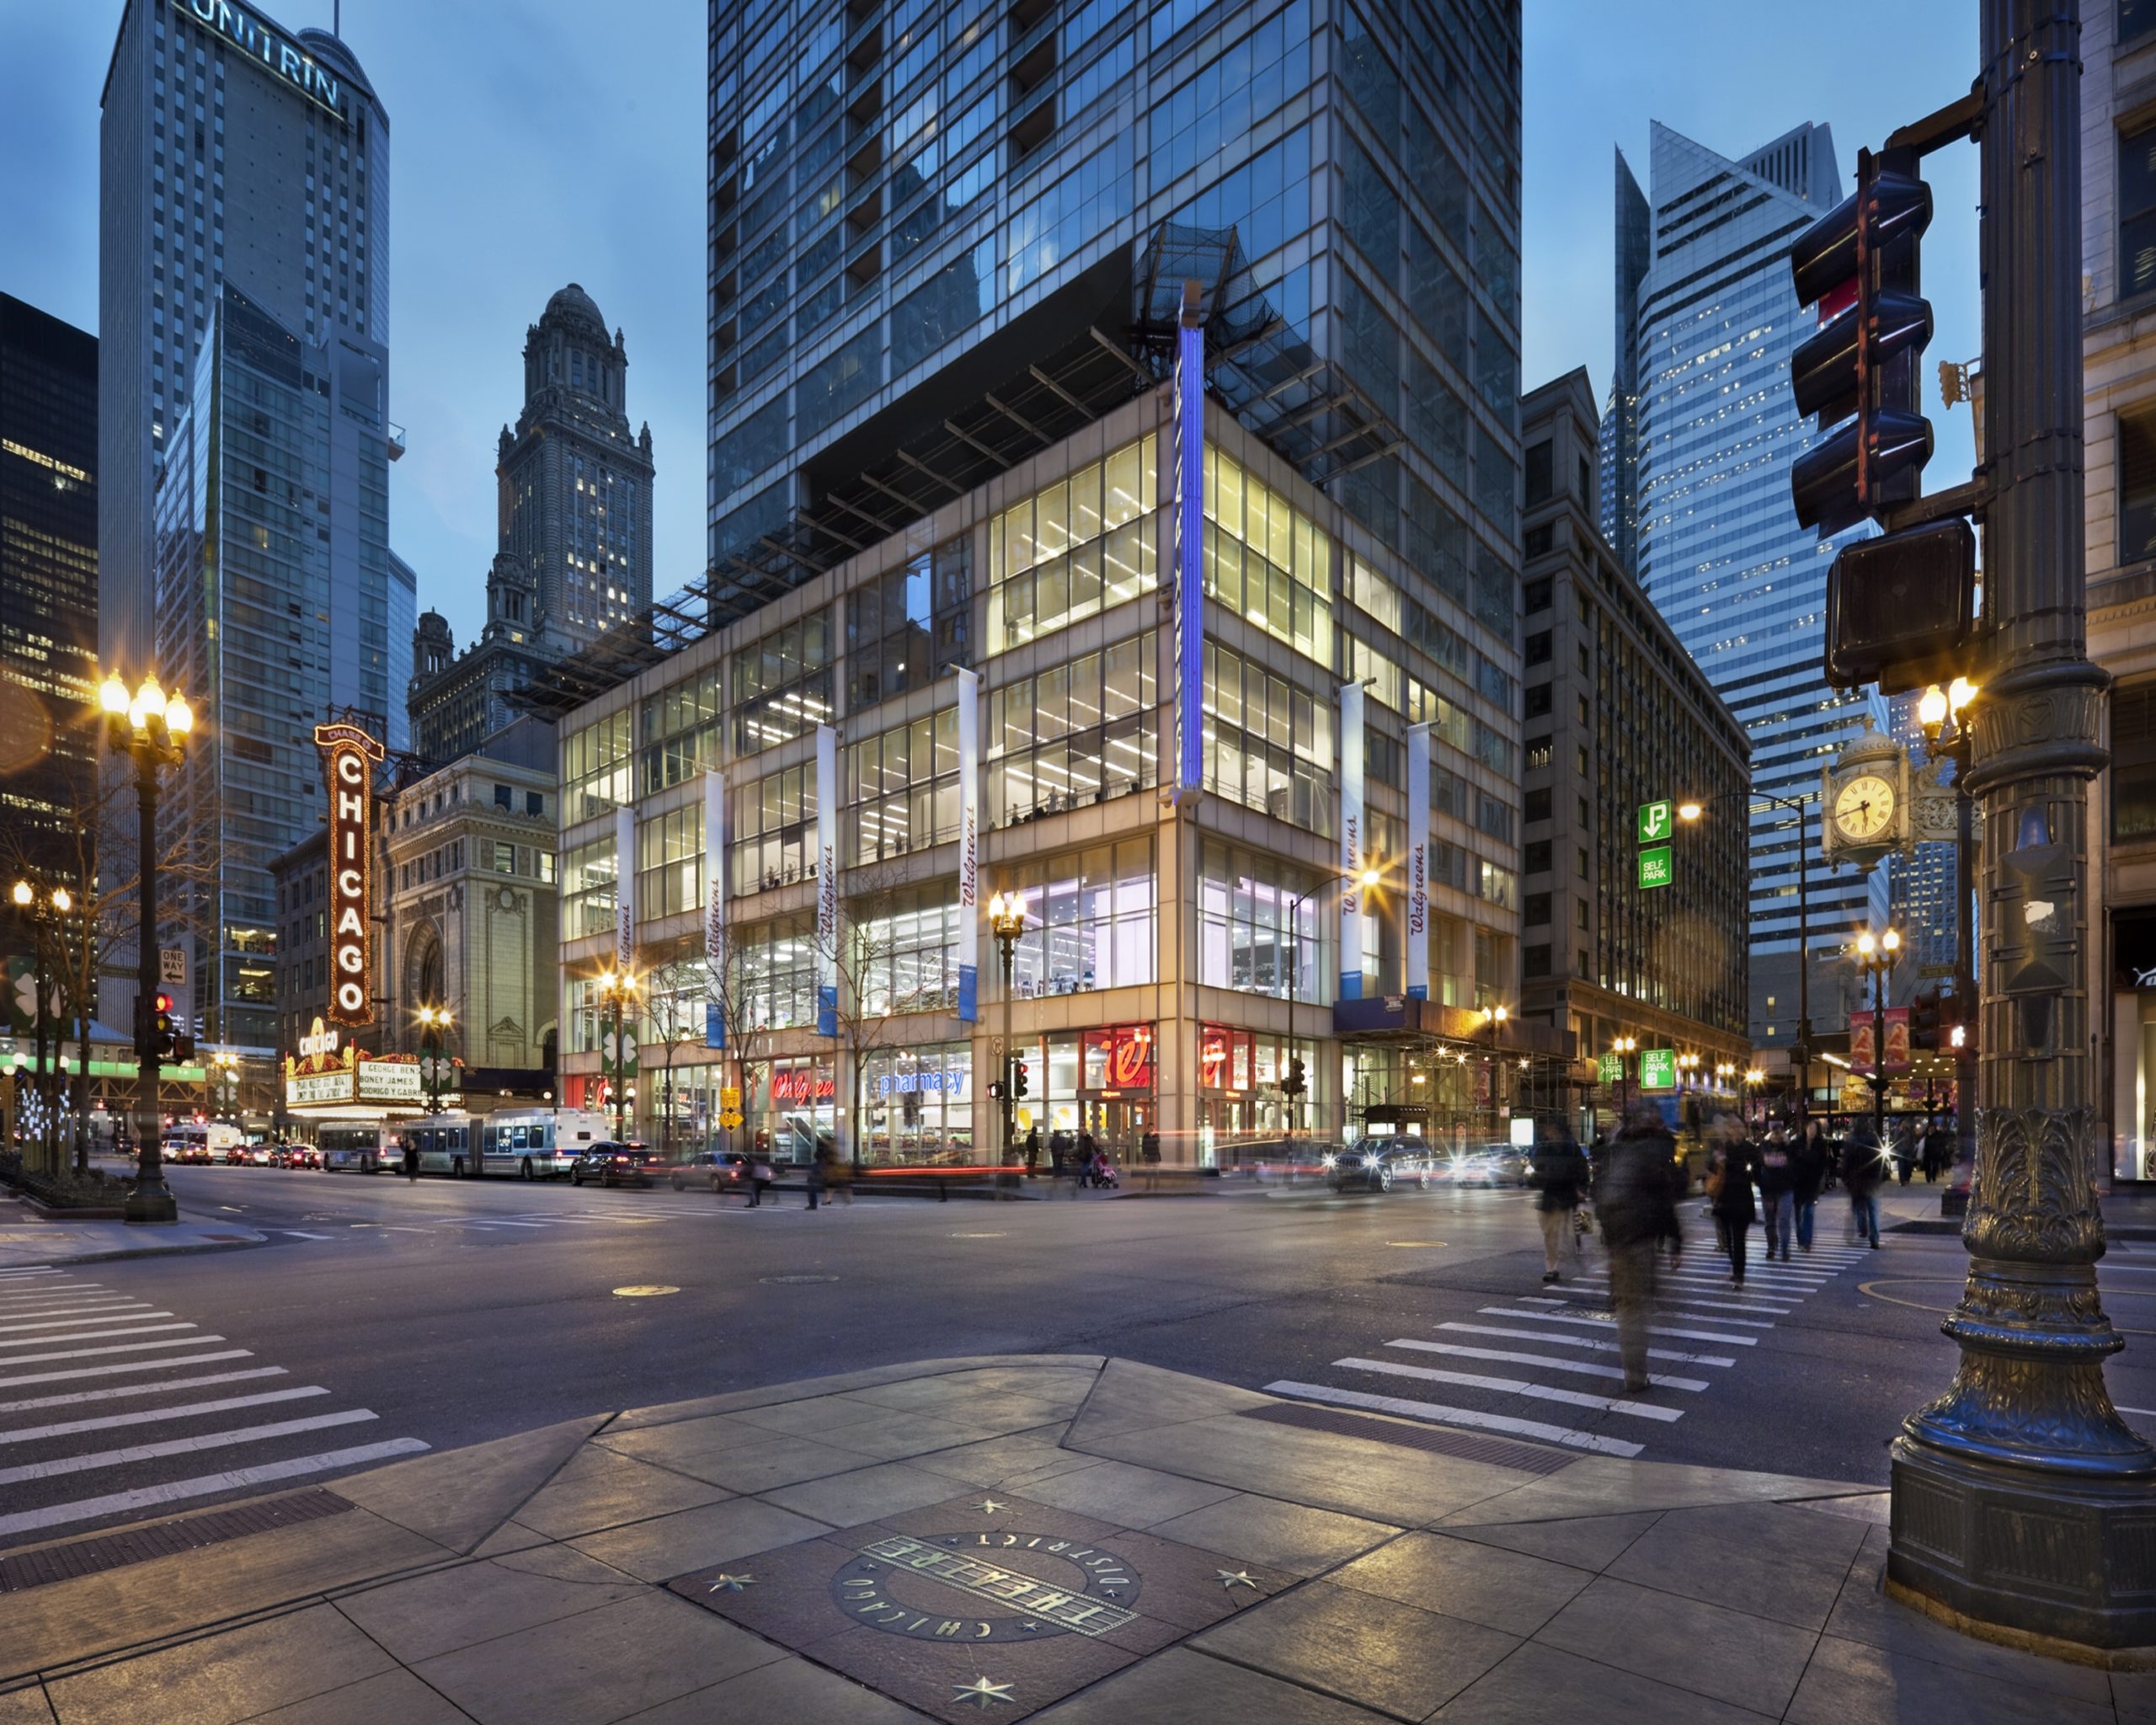 Exterior photo of a Walgreens store in downtown Chicago.